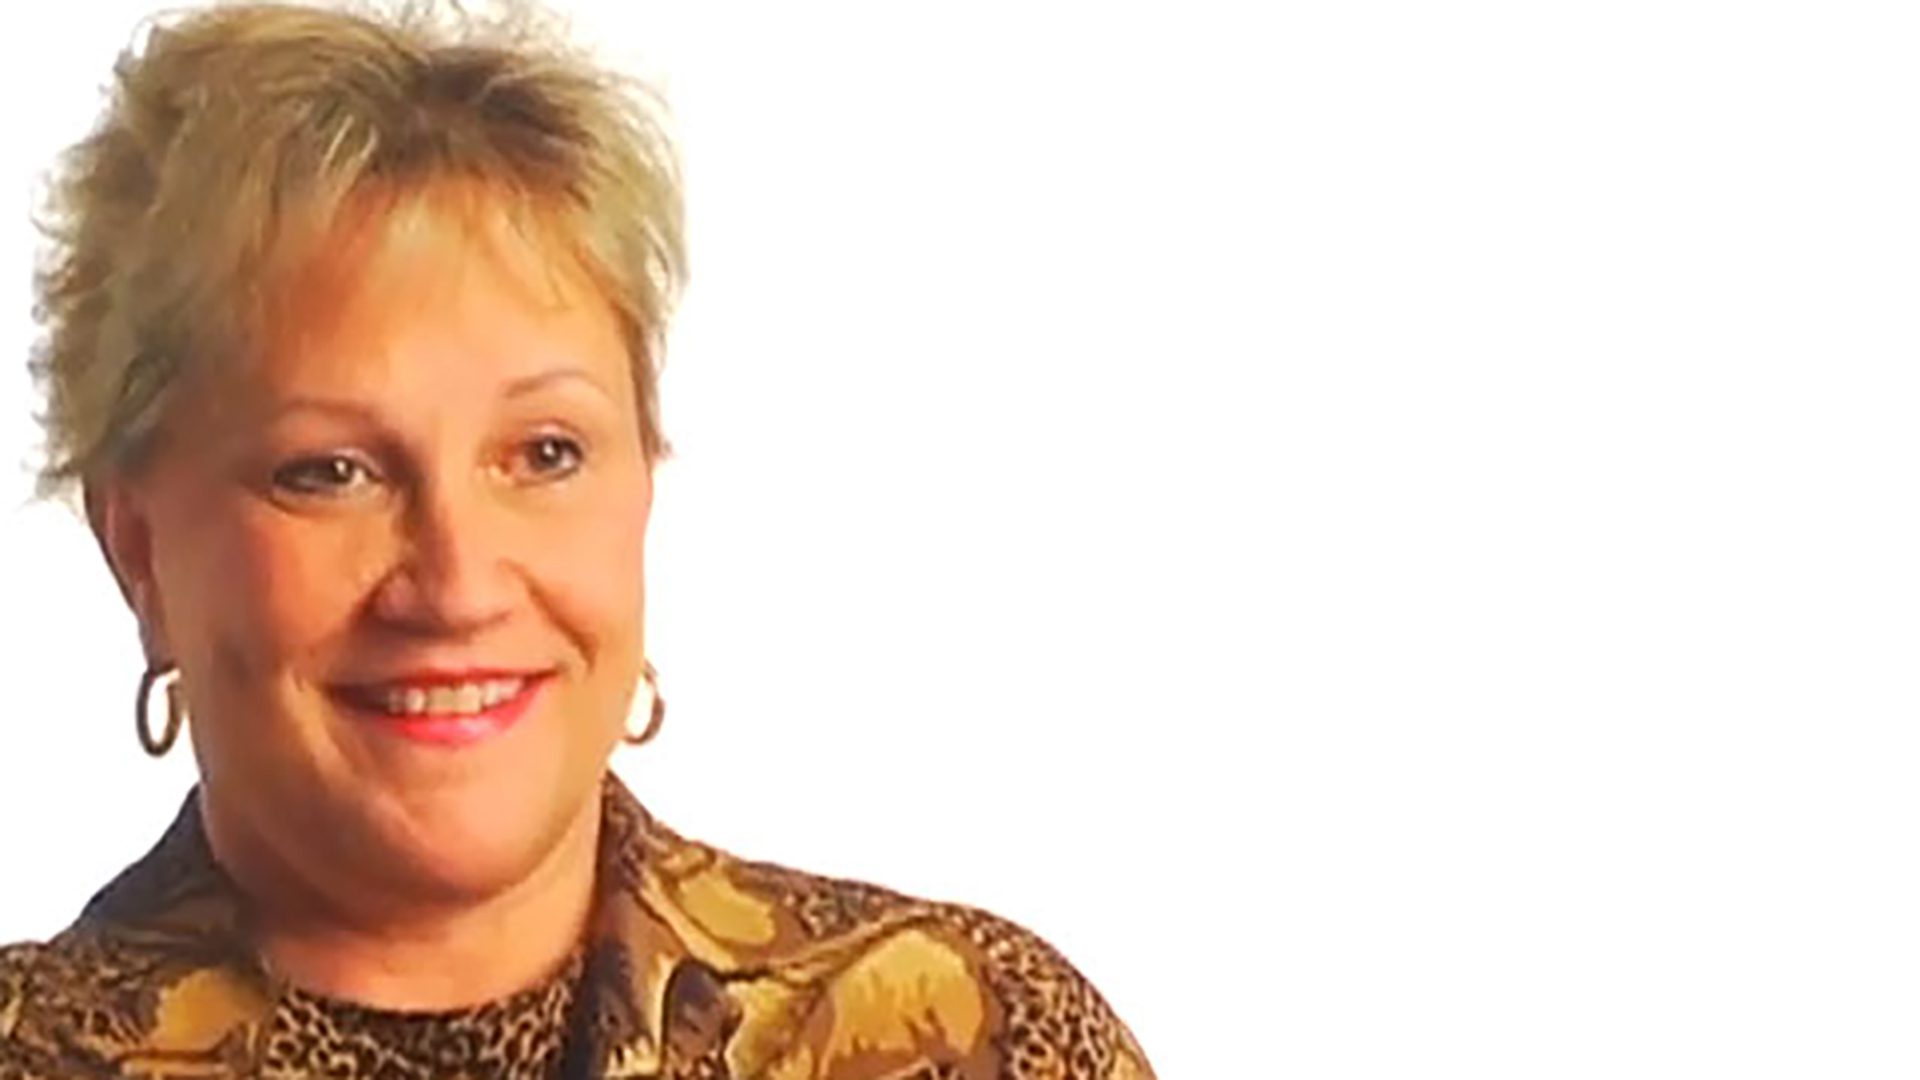 A middle-aged woman with short blonde hair wears an animal-print shirt and is interviewed against a white background.